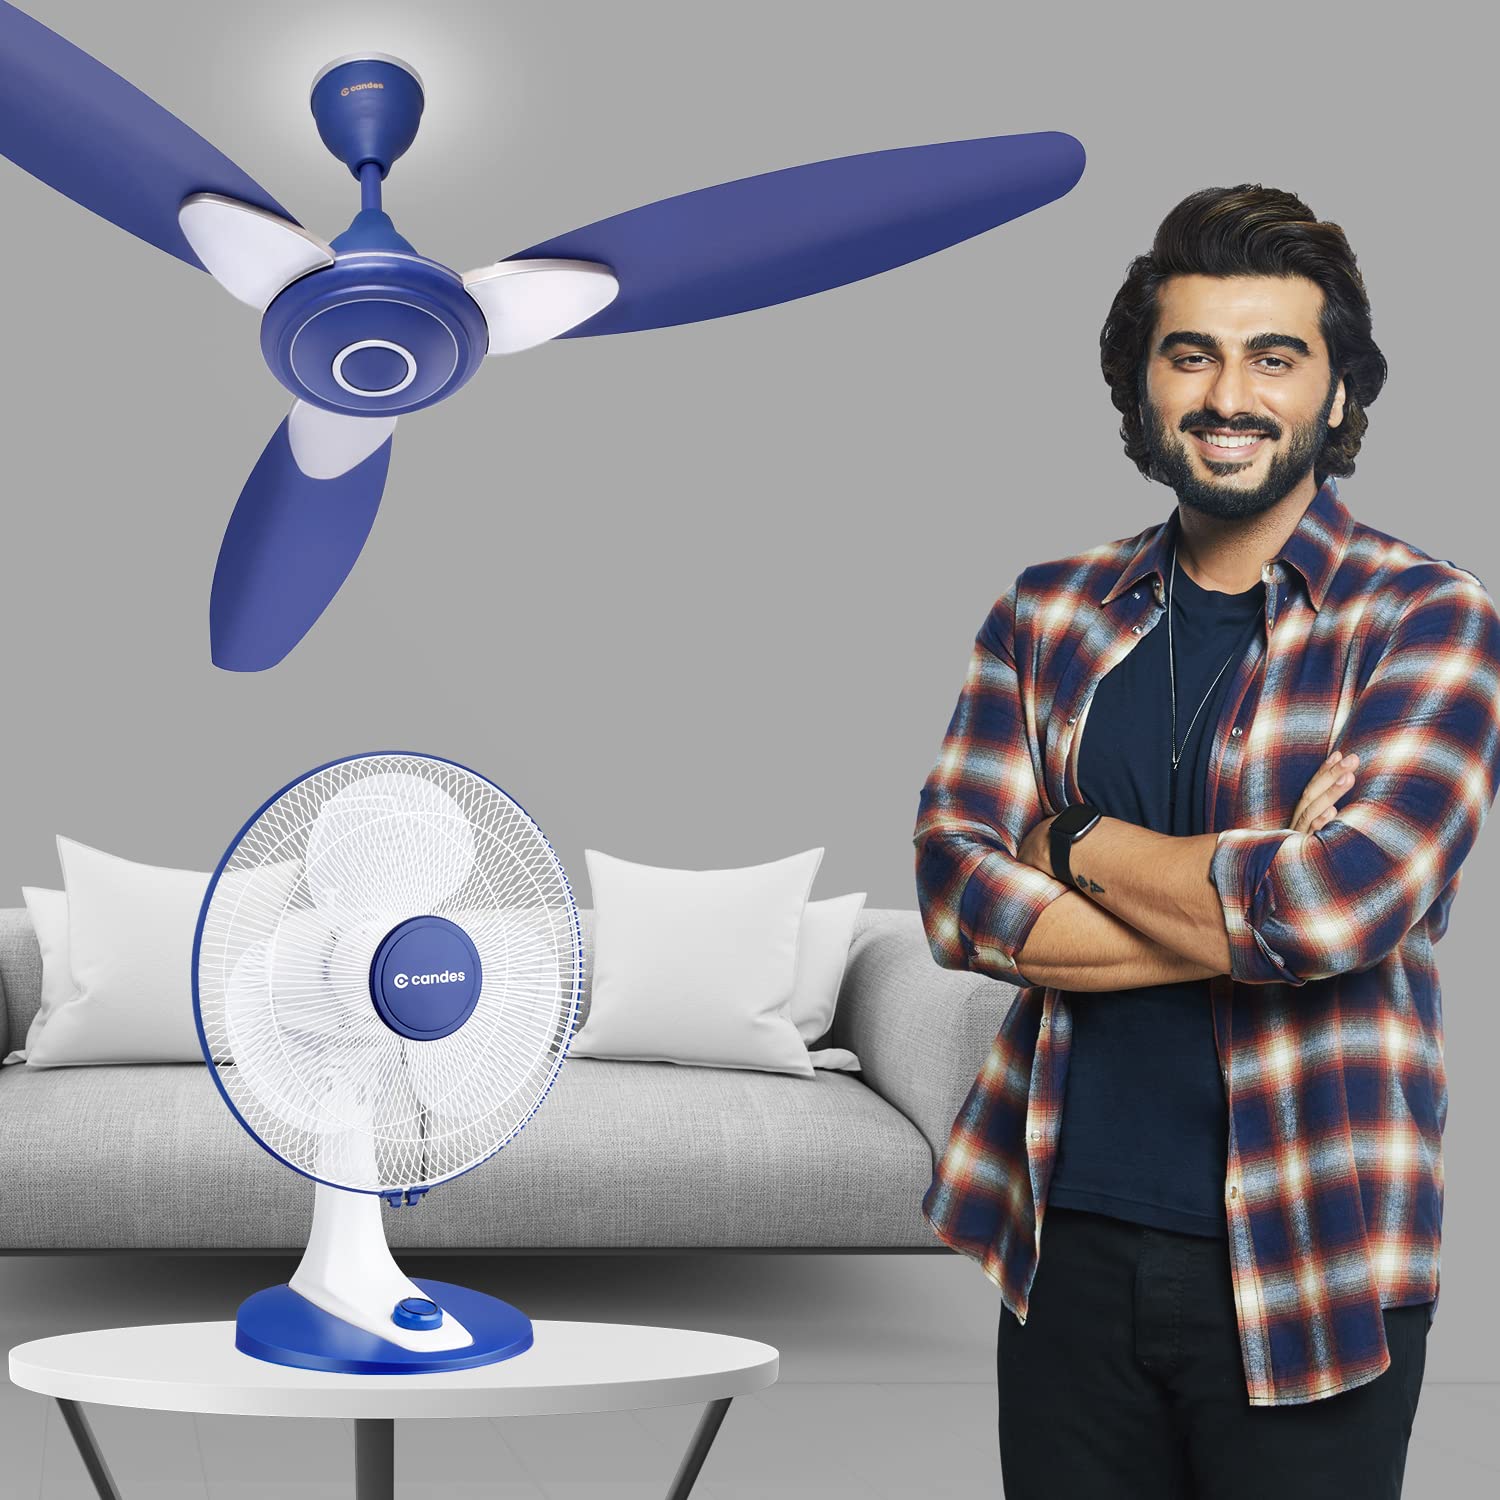 Candes Aura 3 Blade Automatic Oscillation Wall Fan With 2 Year Warranty (White Blue, 400mm)